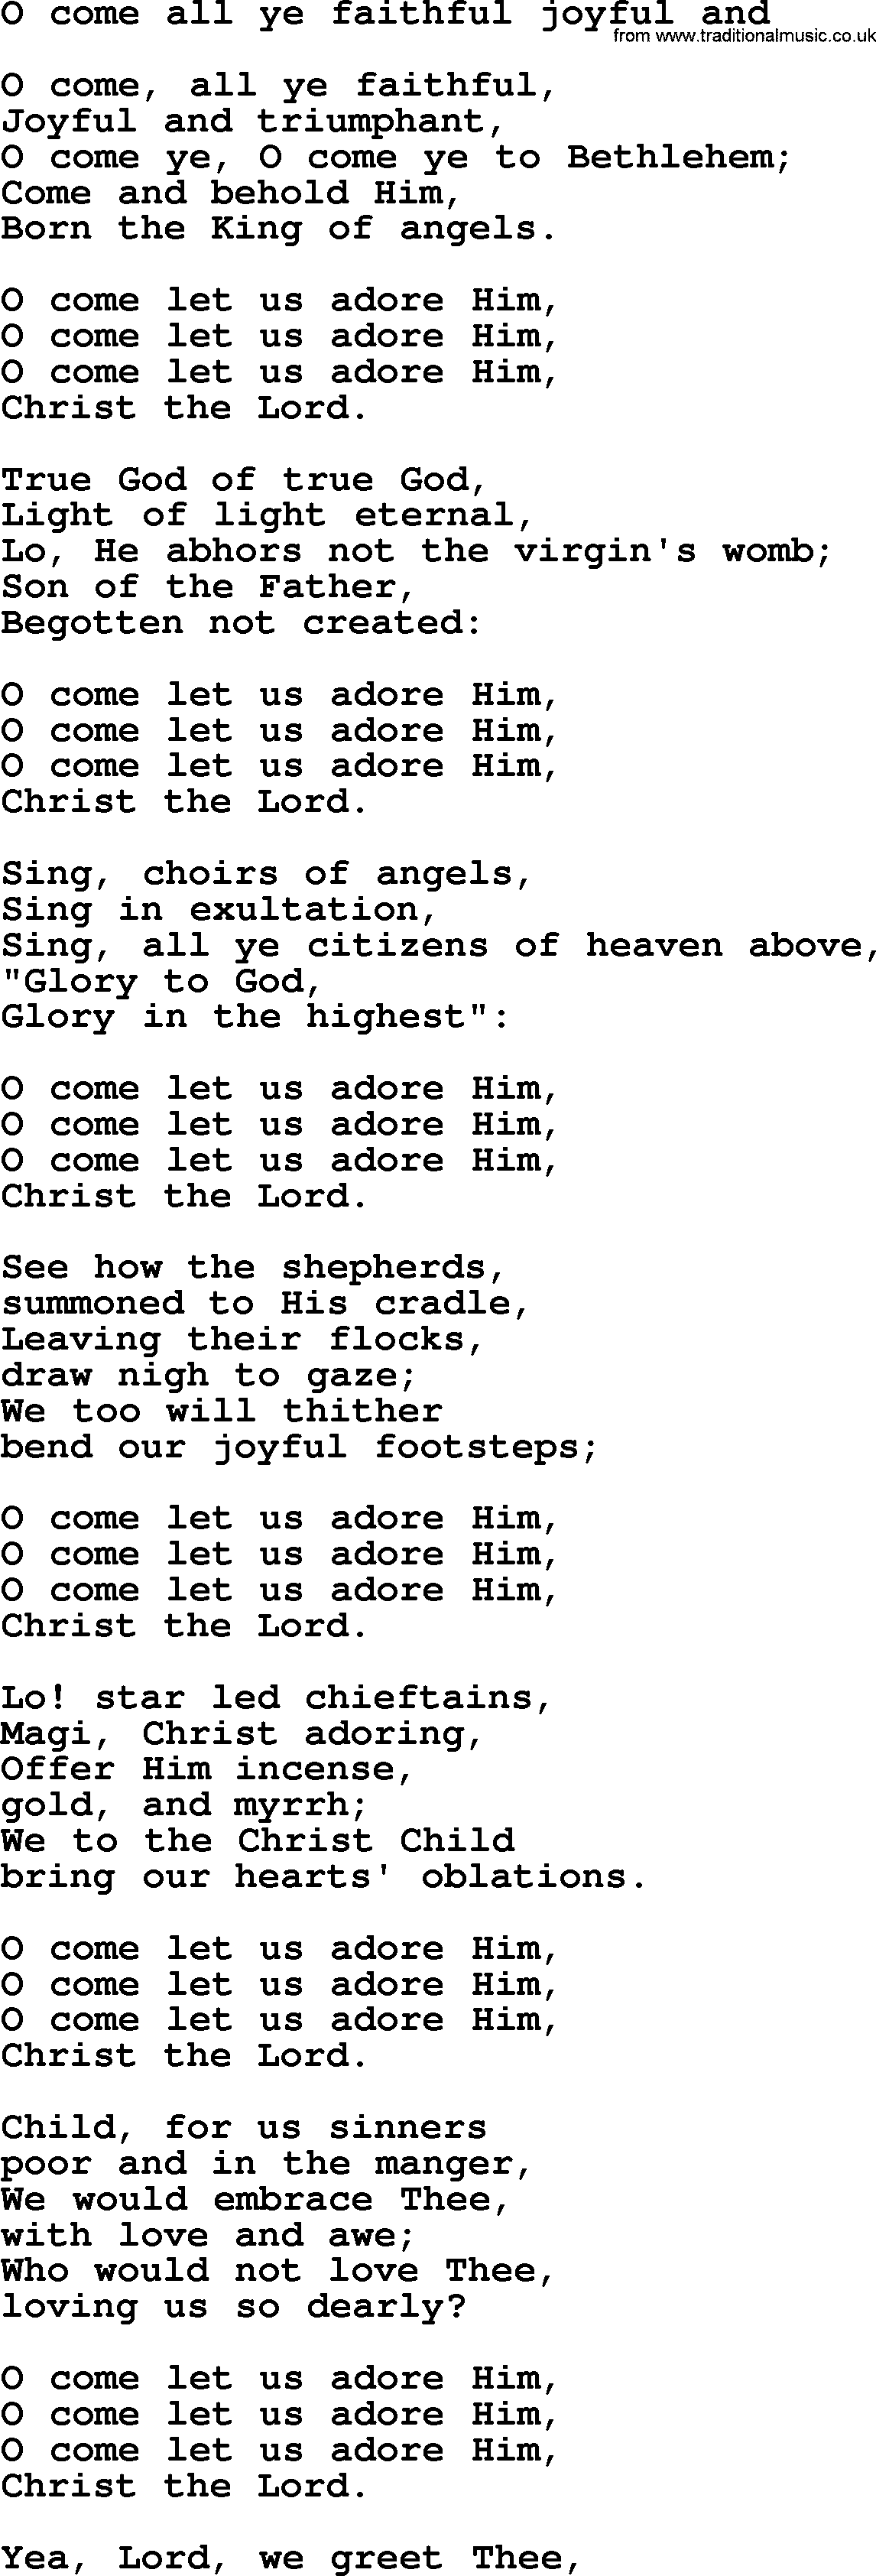 Sacred Songs and Solos complete, 1200 Hymns, title: O Come All Ye Faithful Joyful And, lyrics and PDF